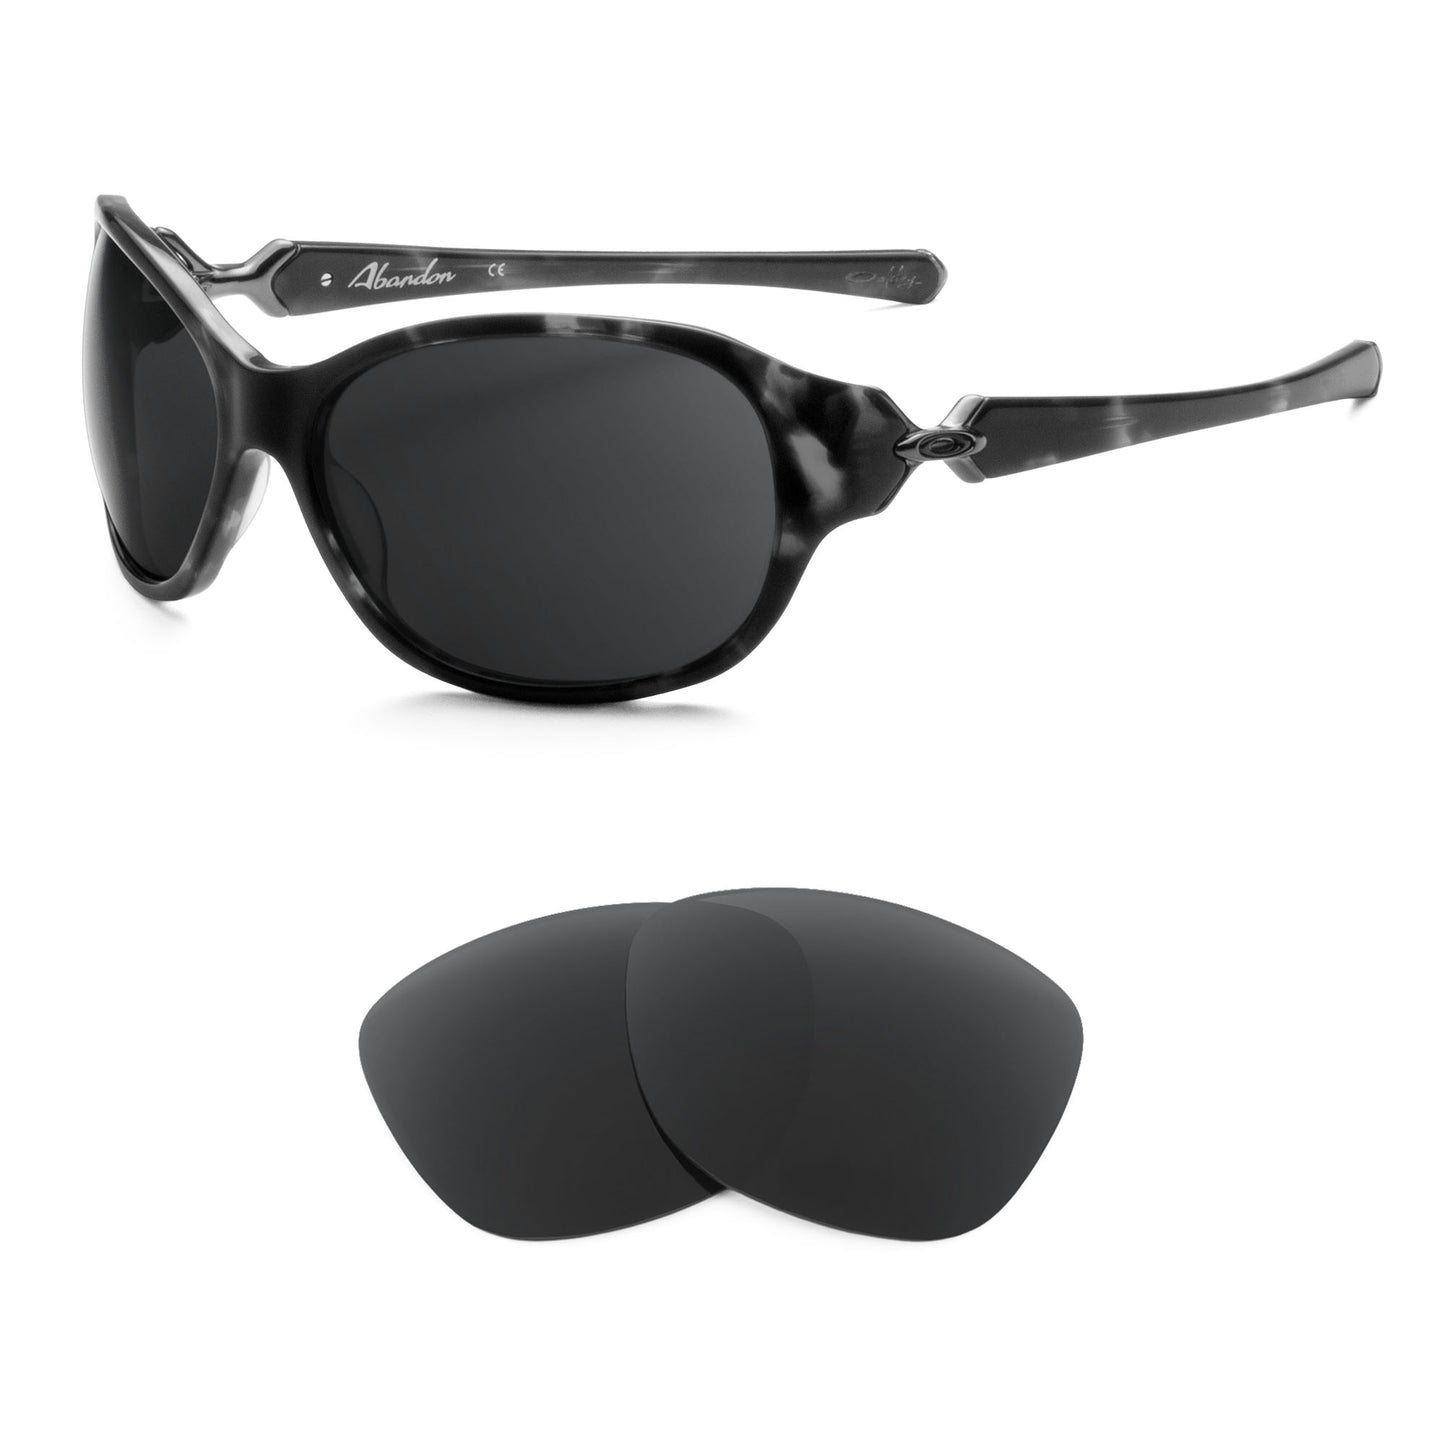 Oakley Abandon sunglasses with replacement lenses